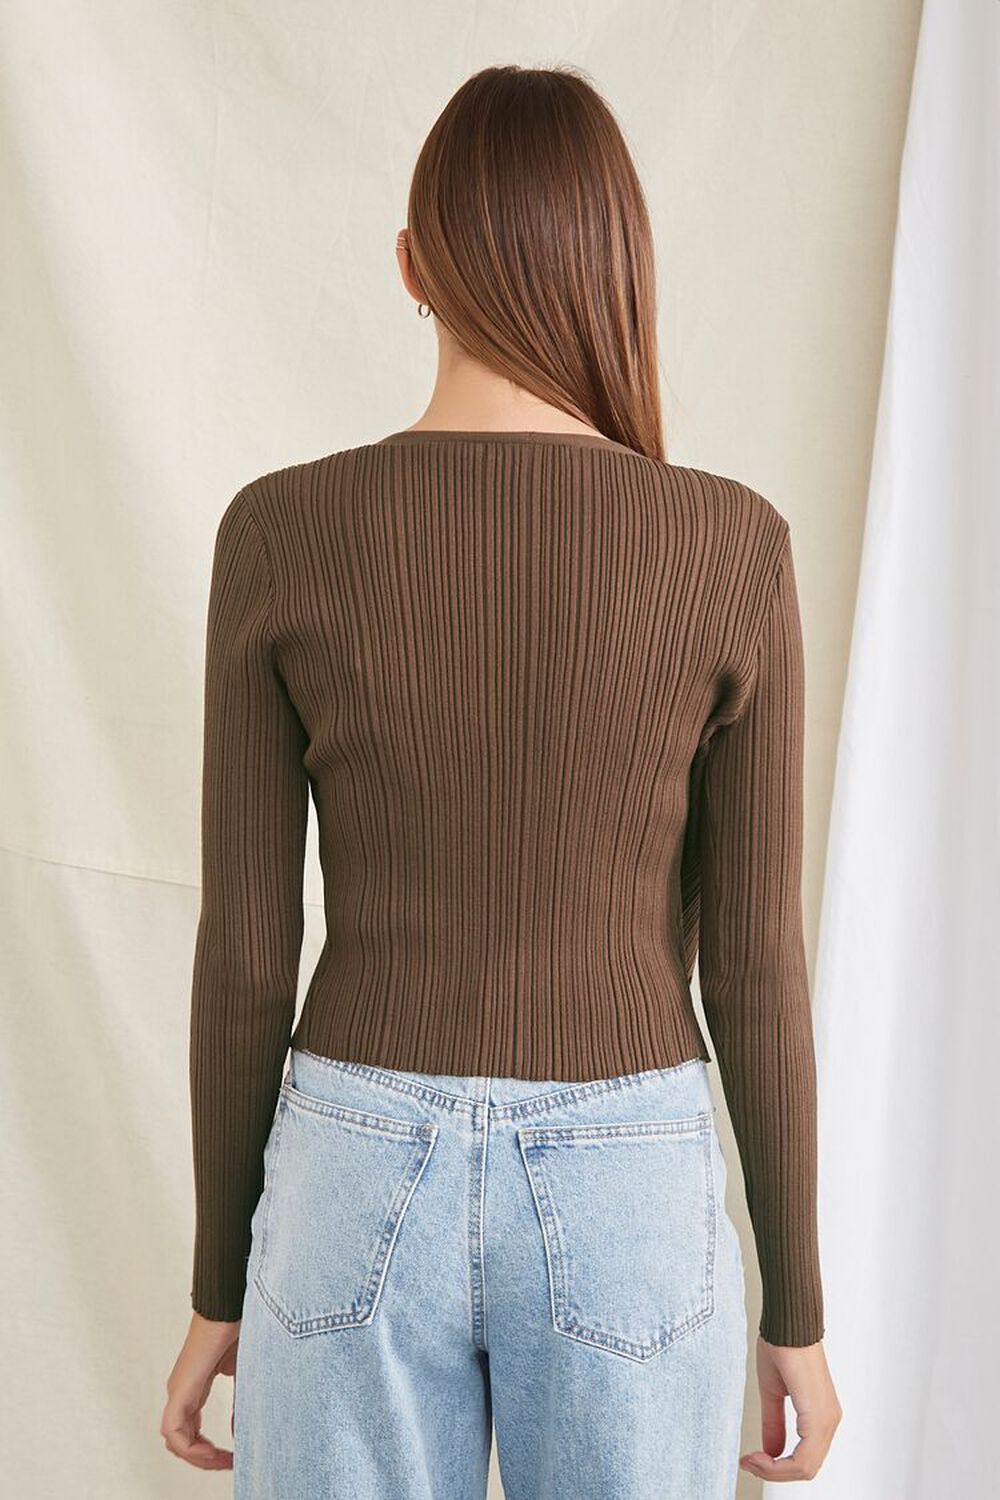 BROWN Ribbed Knit Cardigan Sweater, image 3